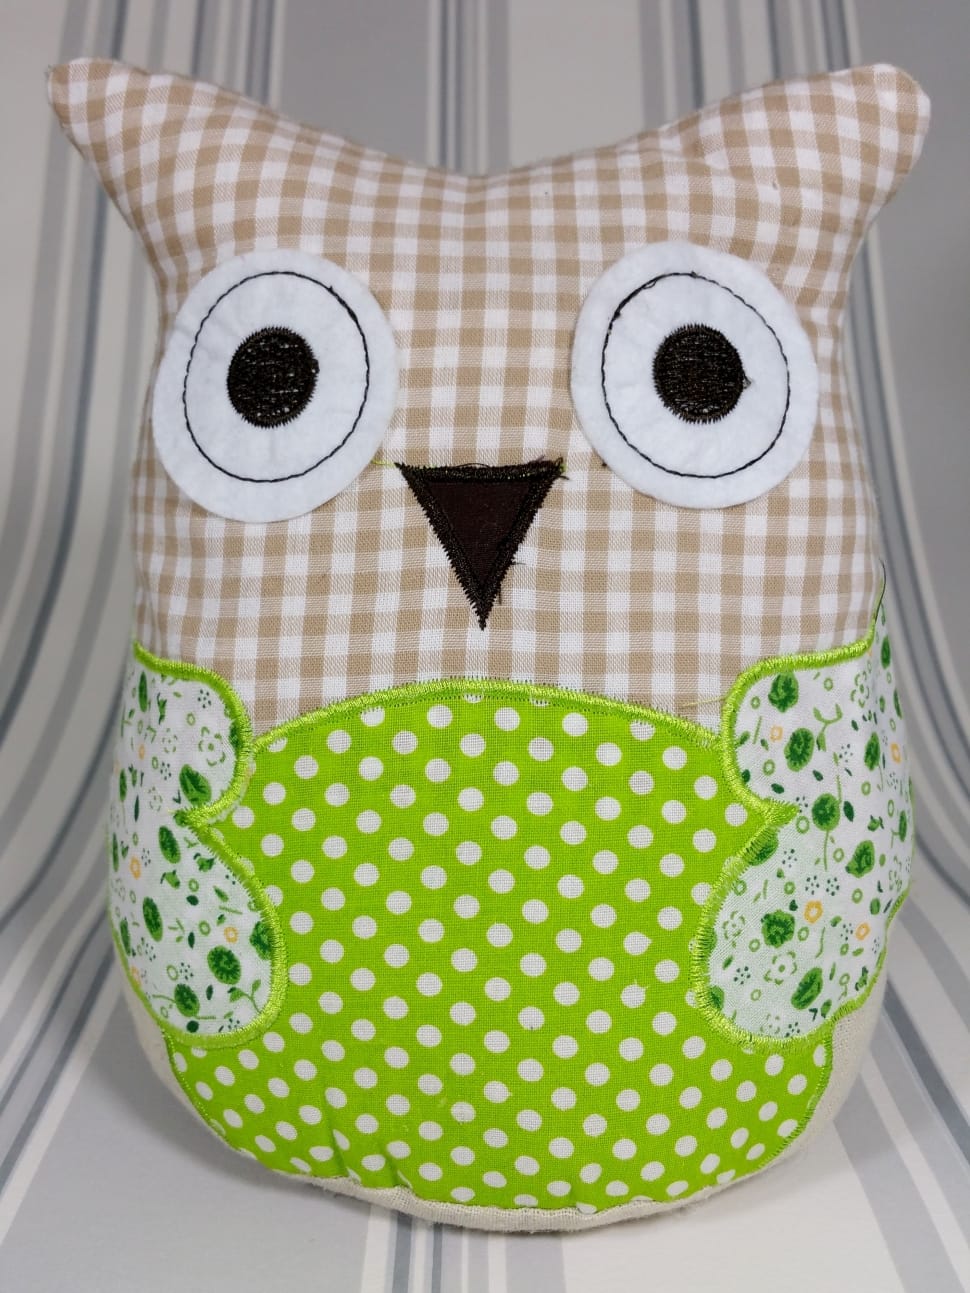 brown white and green polka dot gingham owl shaped pillow preview